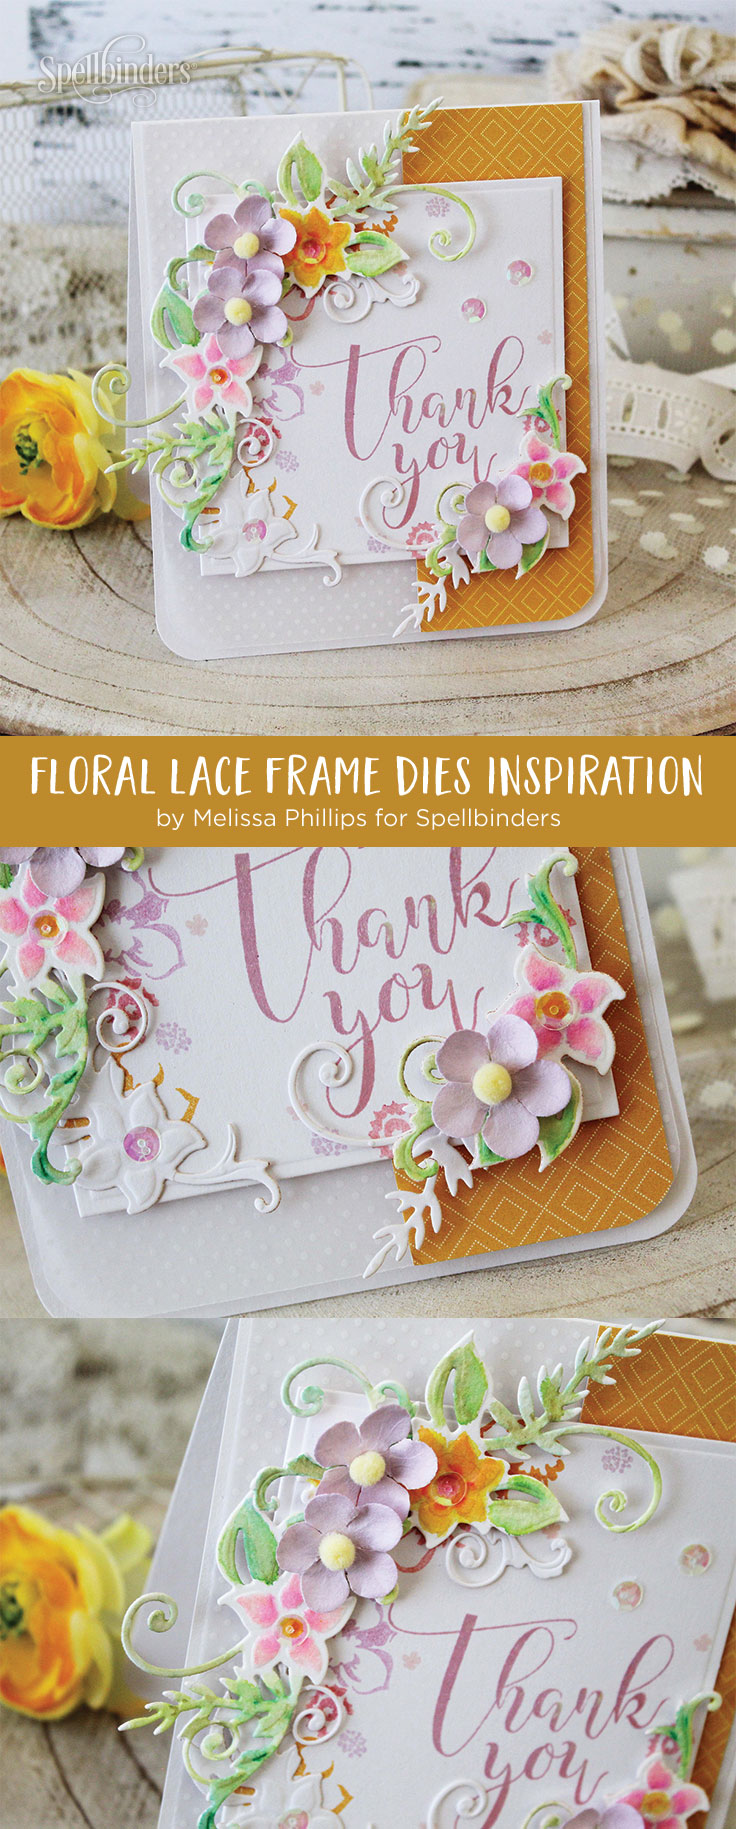 Spellbinders Large Die Of The Month Inspiration | Floral Lace Frame Die Set. Handmade card by Melissa Phillips. #spellbinders #spellbindersClubKits #neverstopmaking #diecutting #handmadecard #thankyoucard